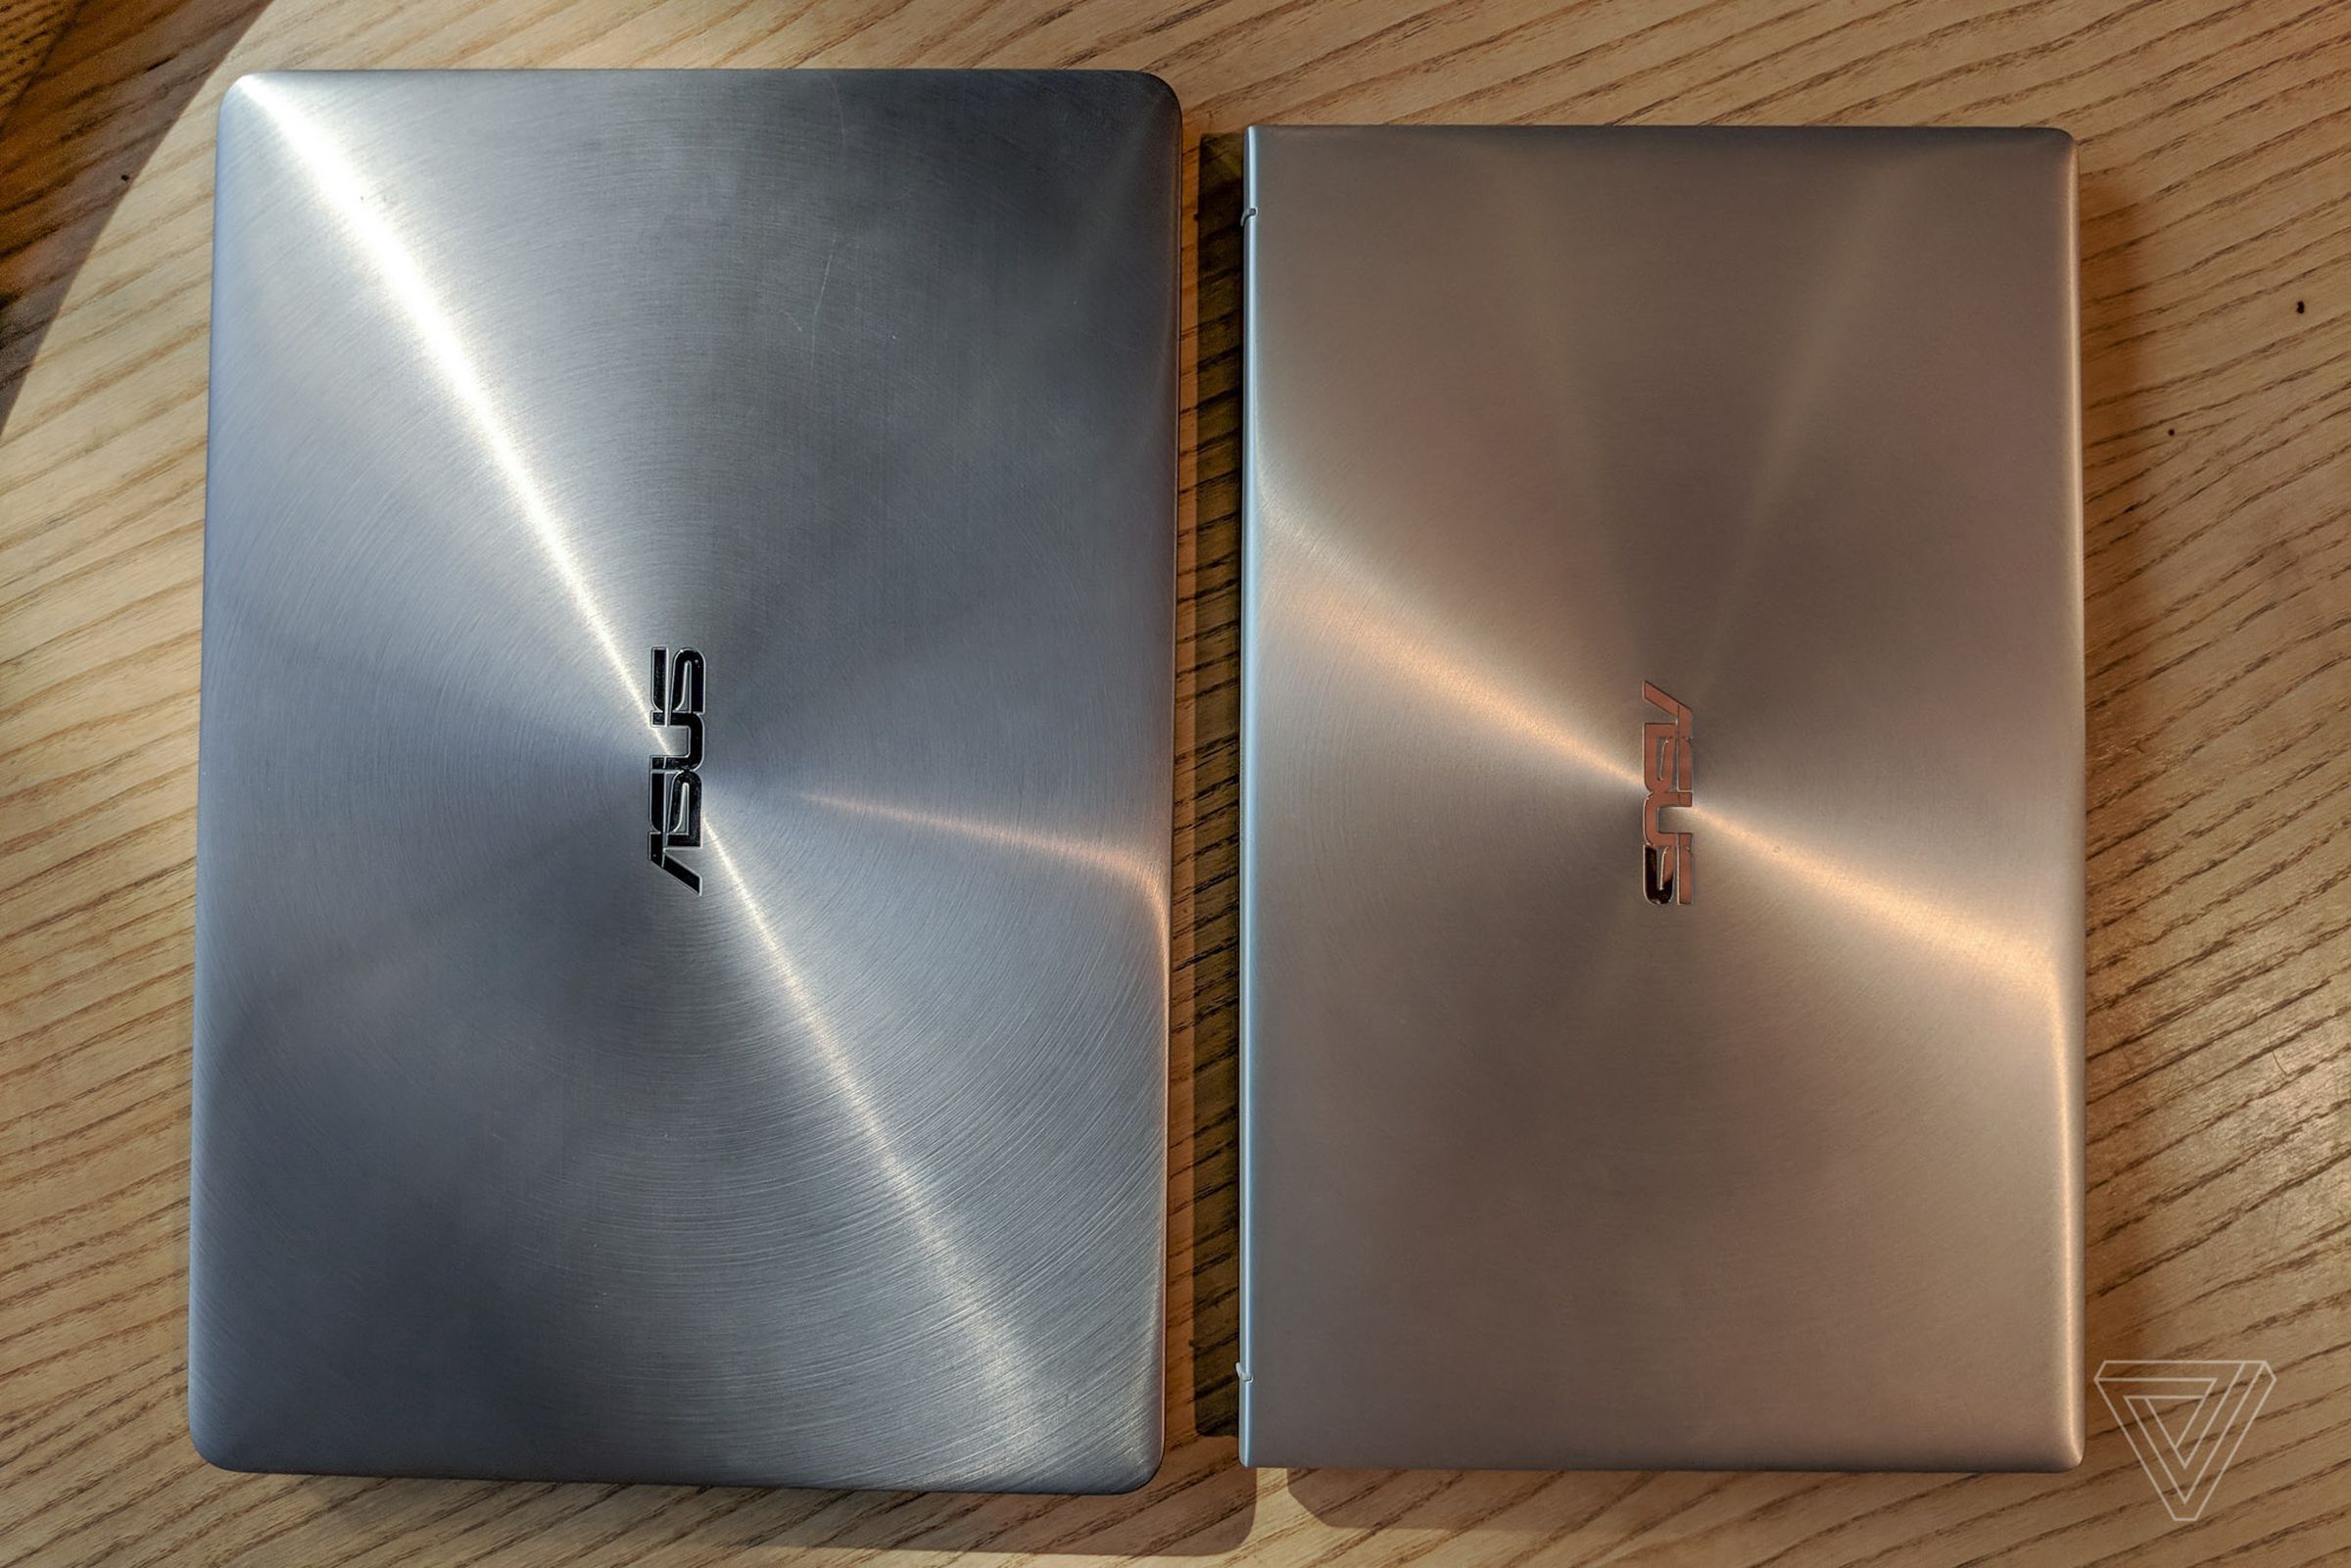 2017’s ZenBook 13, on the left, next to the new ZenBook 13, on the right.